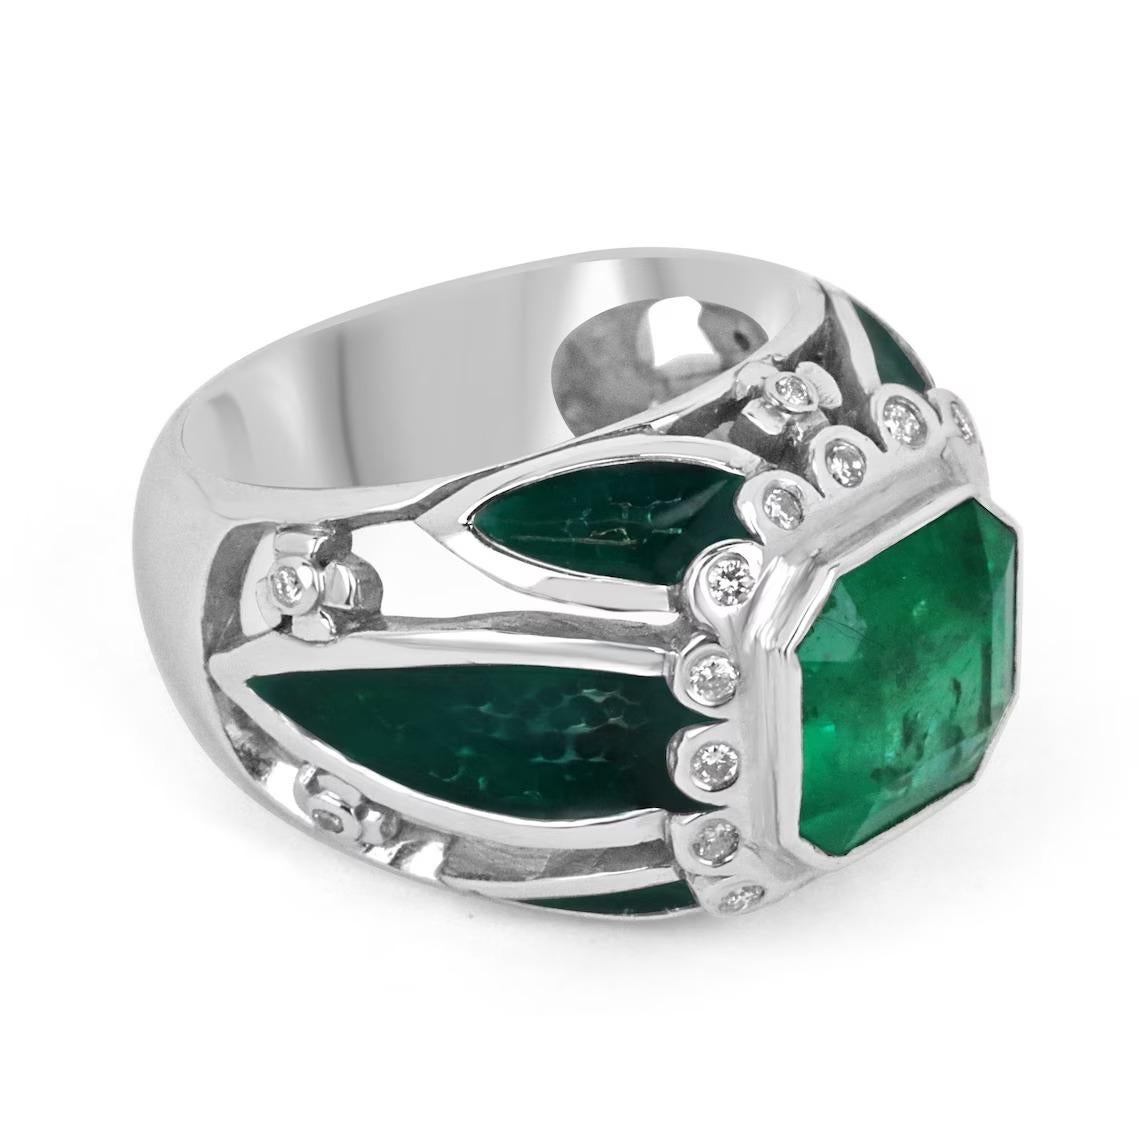 A men's dark Colombian emerald cocktail ring. This superior ring features a top-quality, natural, emerald. The emerald has the most desirable color, known to be the 